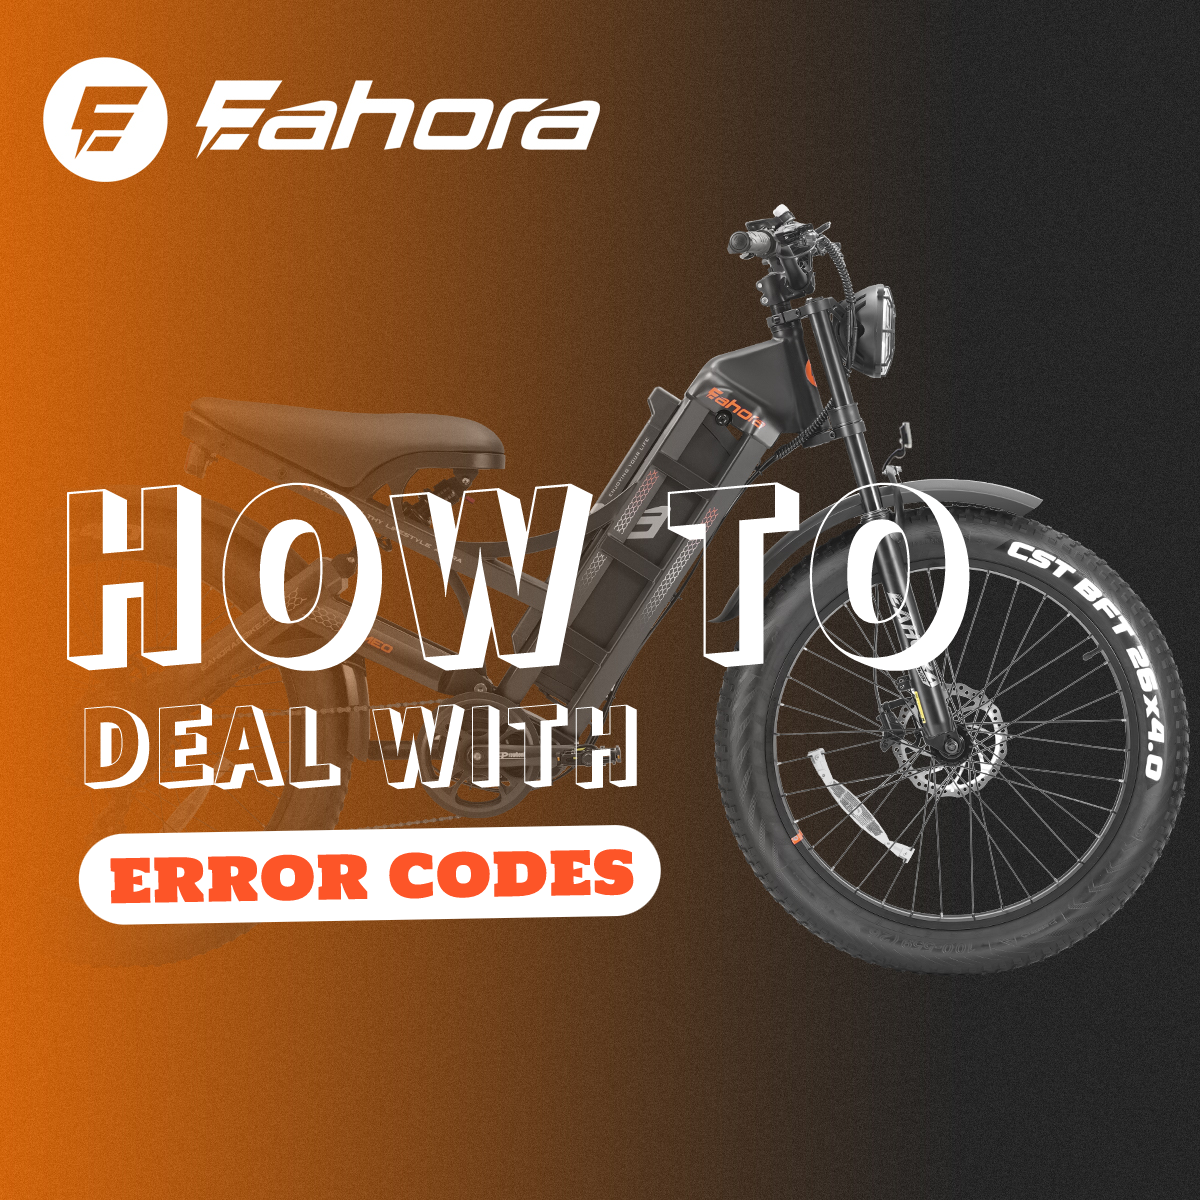 HOW TO DEAL WITH ERROR CODES?